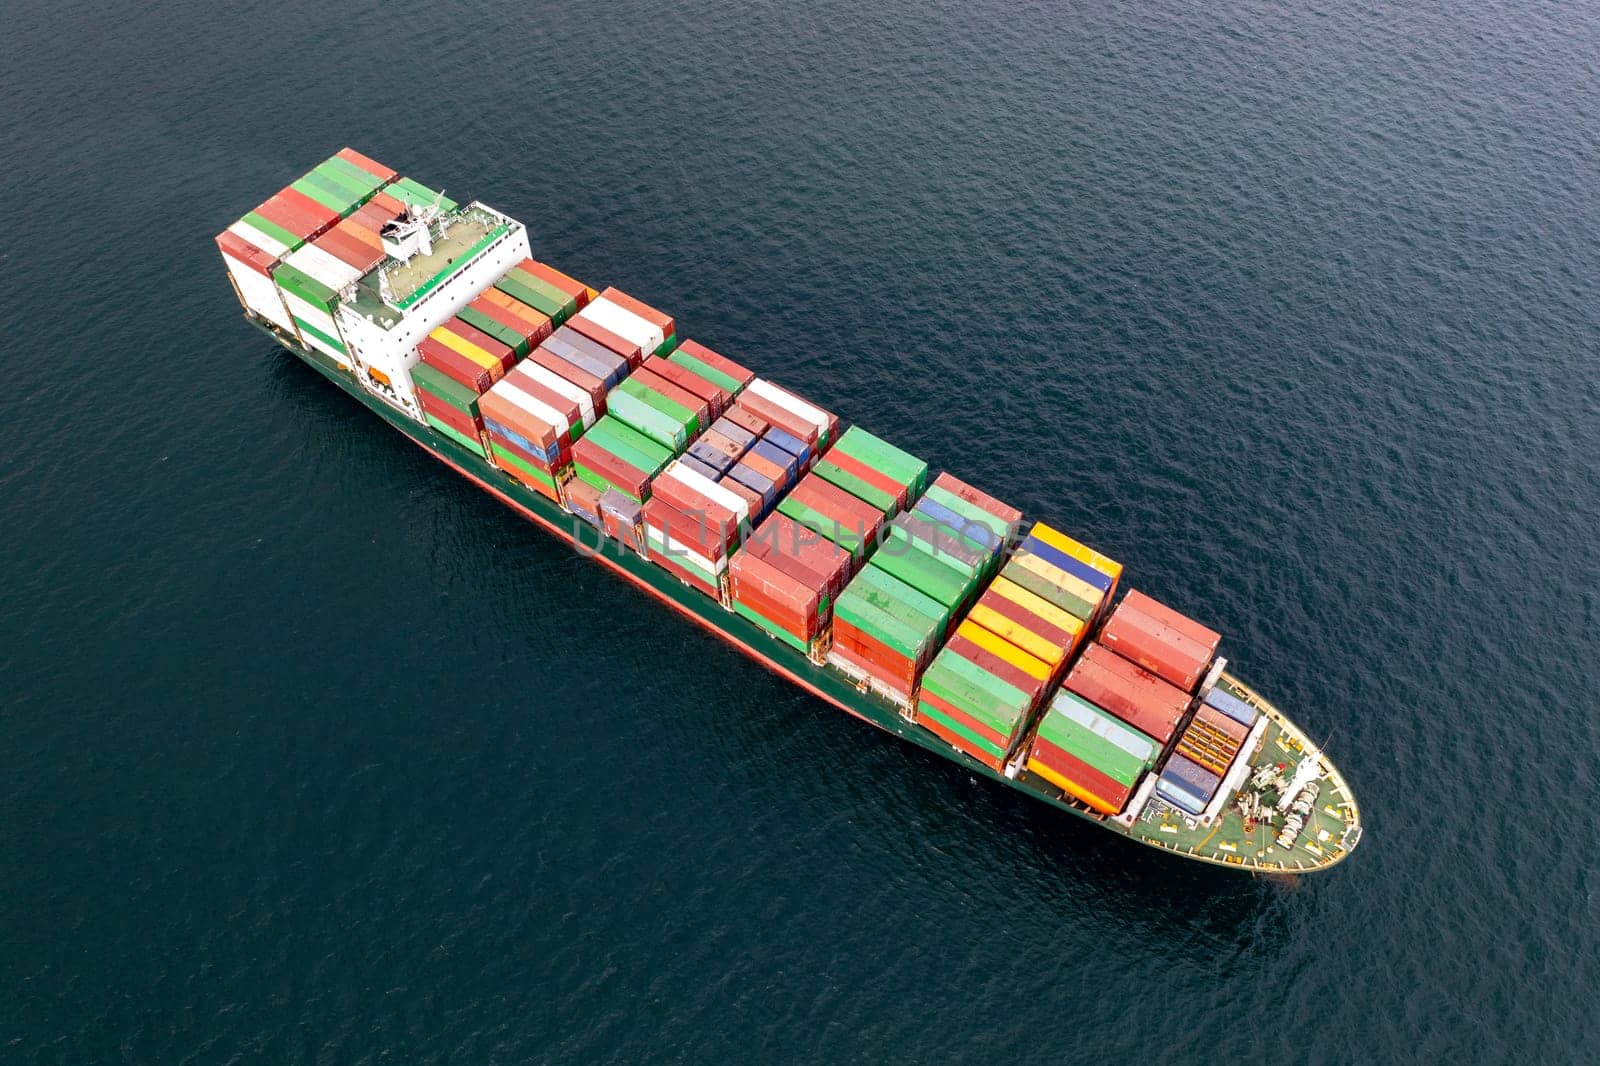 Aerial view of a container cargo ship on the sea. Cargo and shipping logistics business